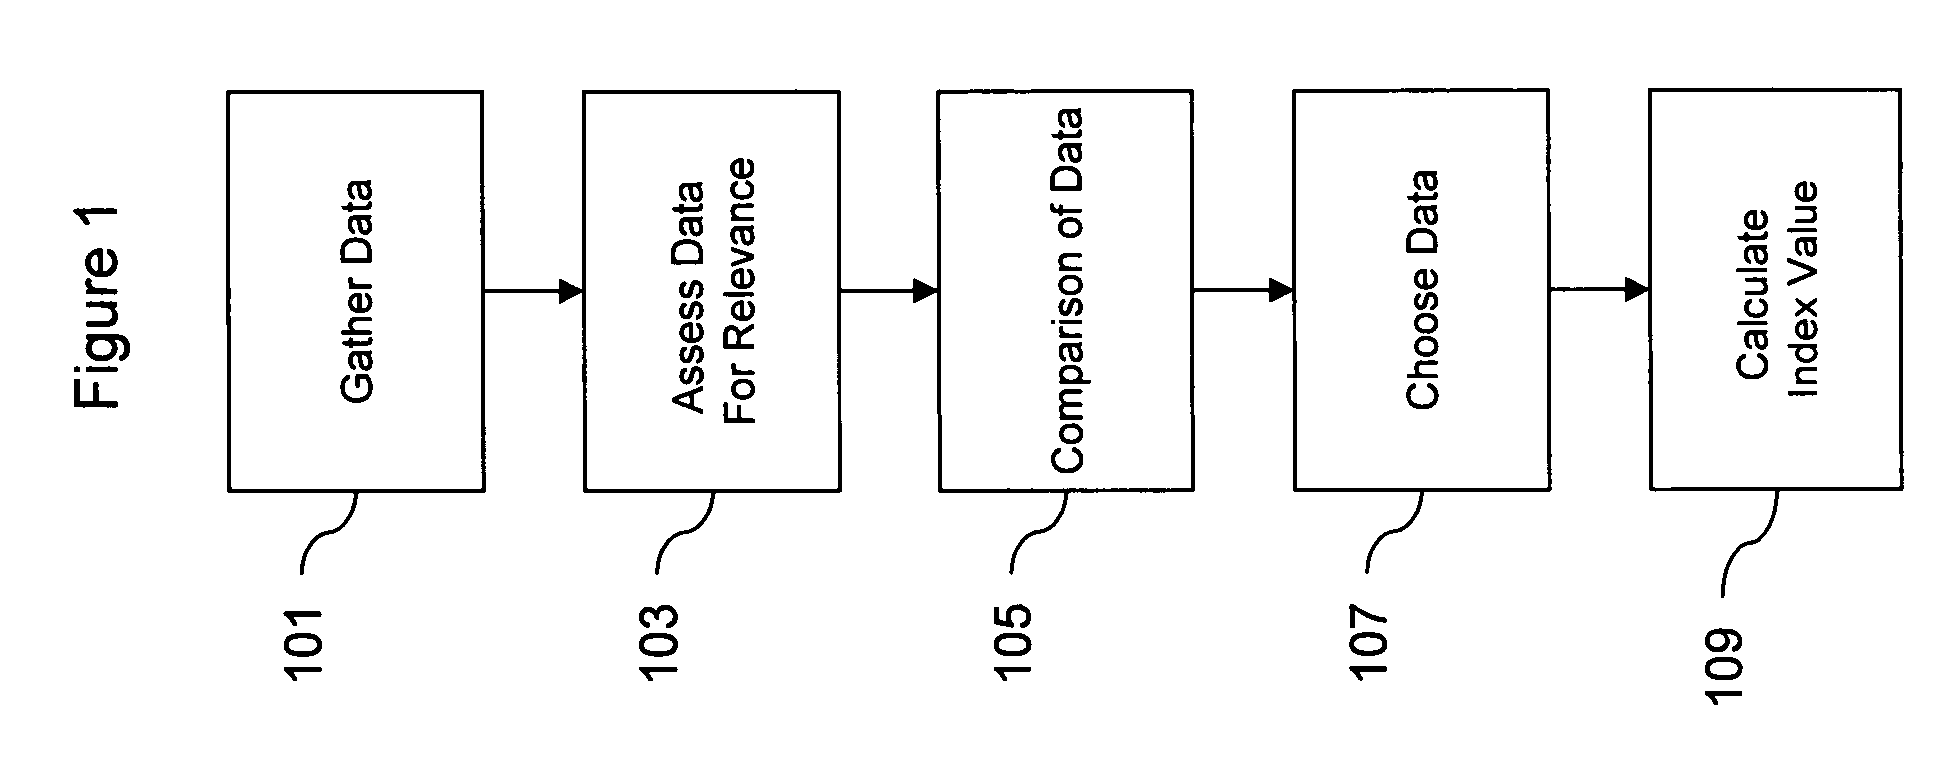 System and method for managing healthcare costs